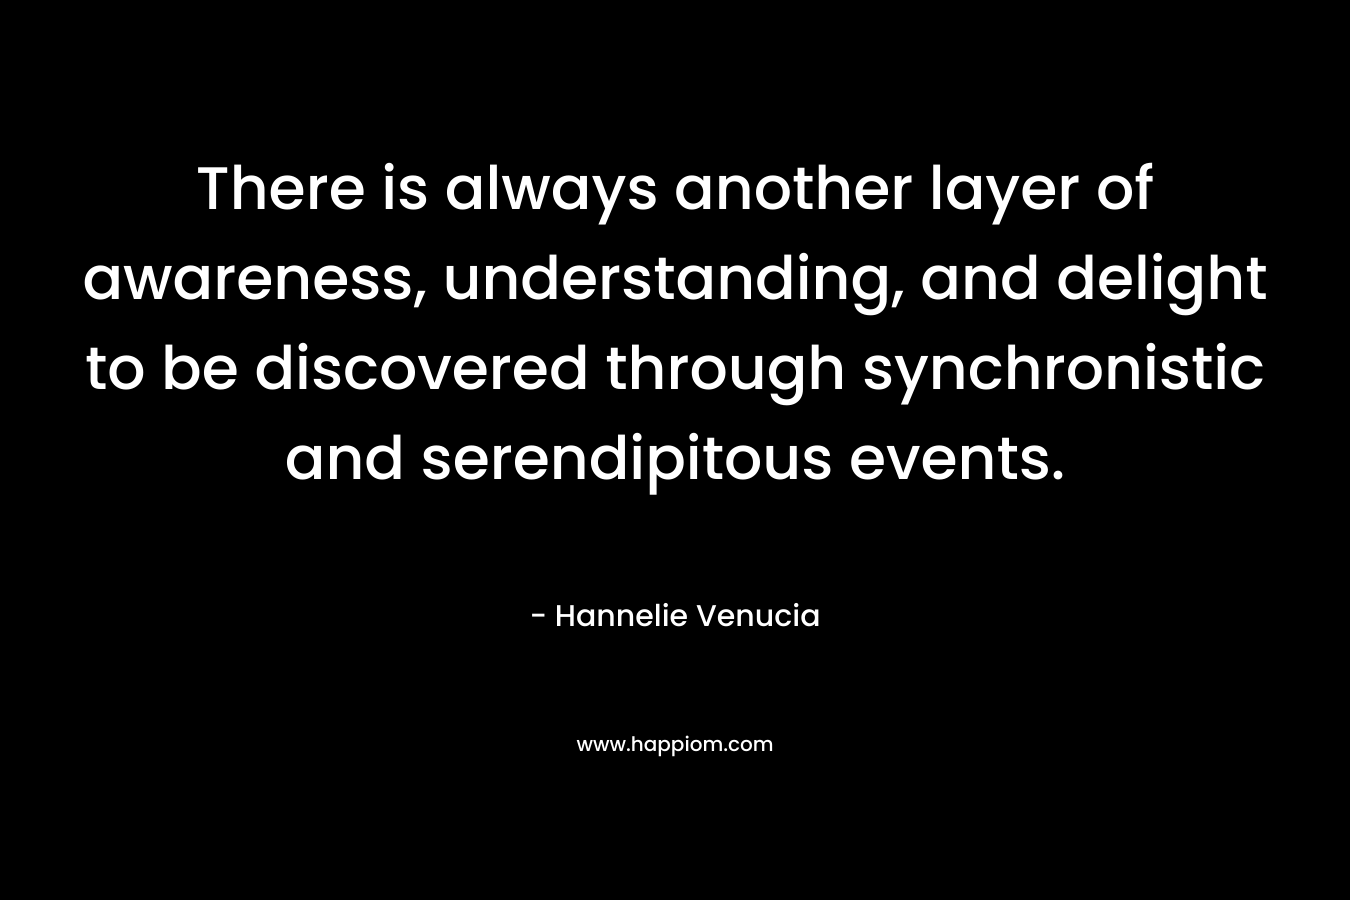 There is always another layer of awareness, understanding, and delight to be discovered through synchronistic and serendipitous events.